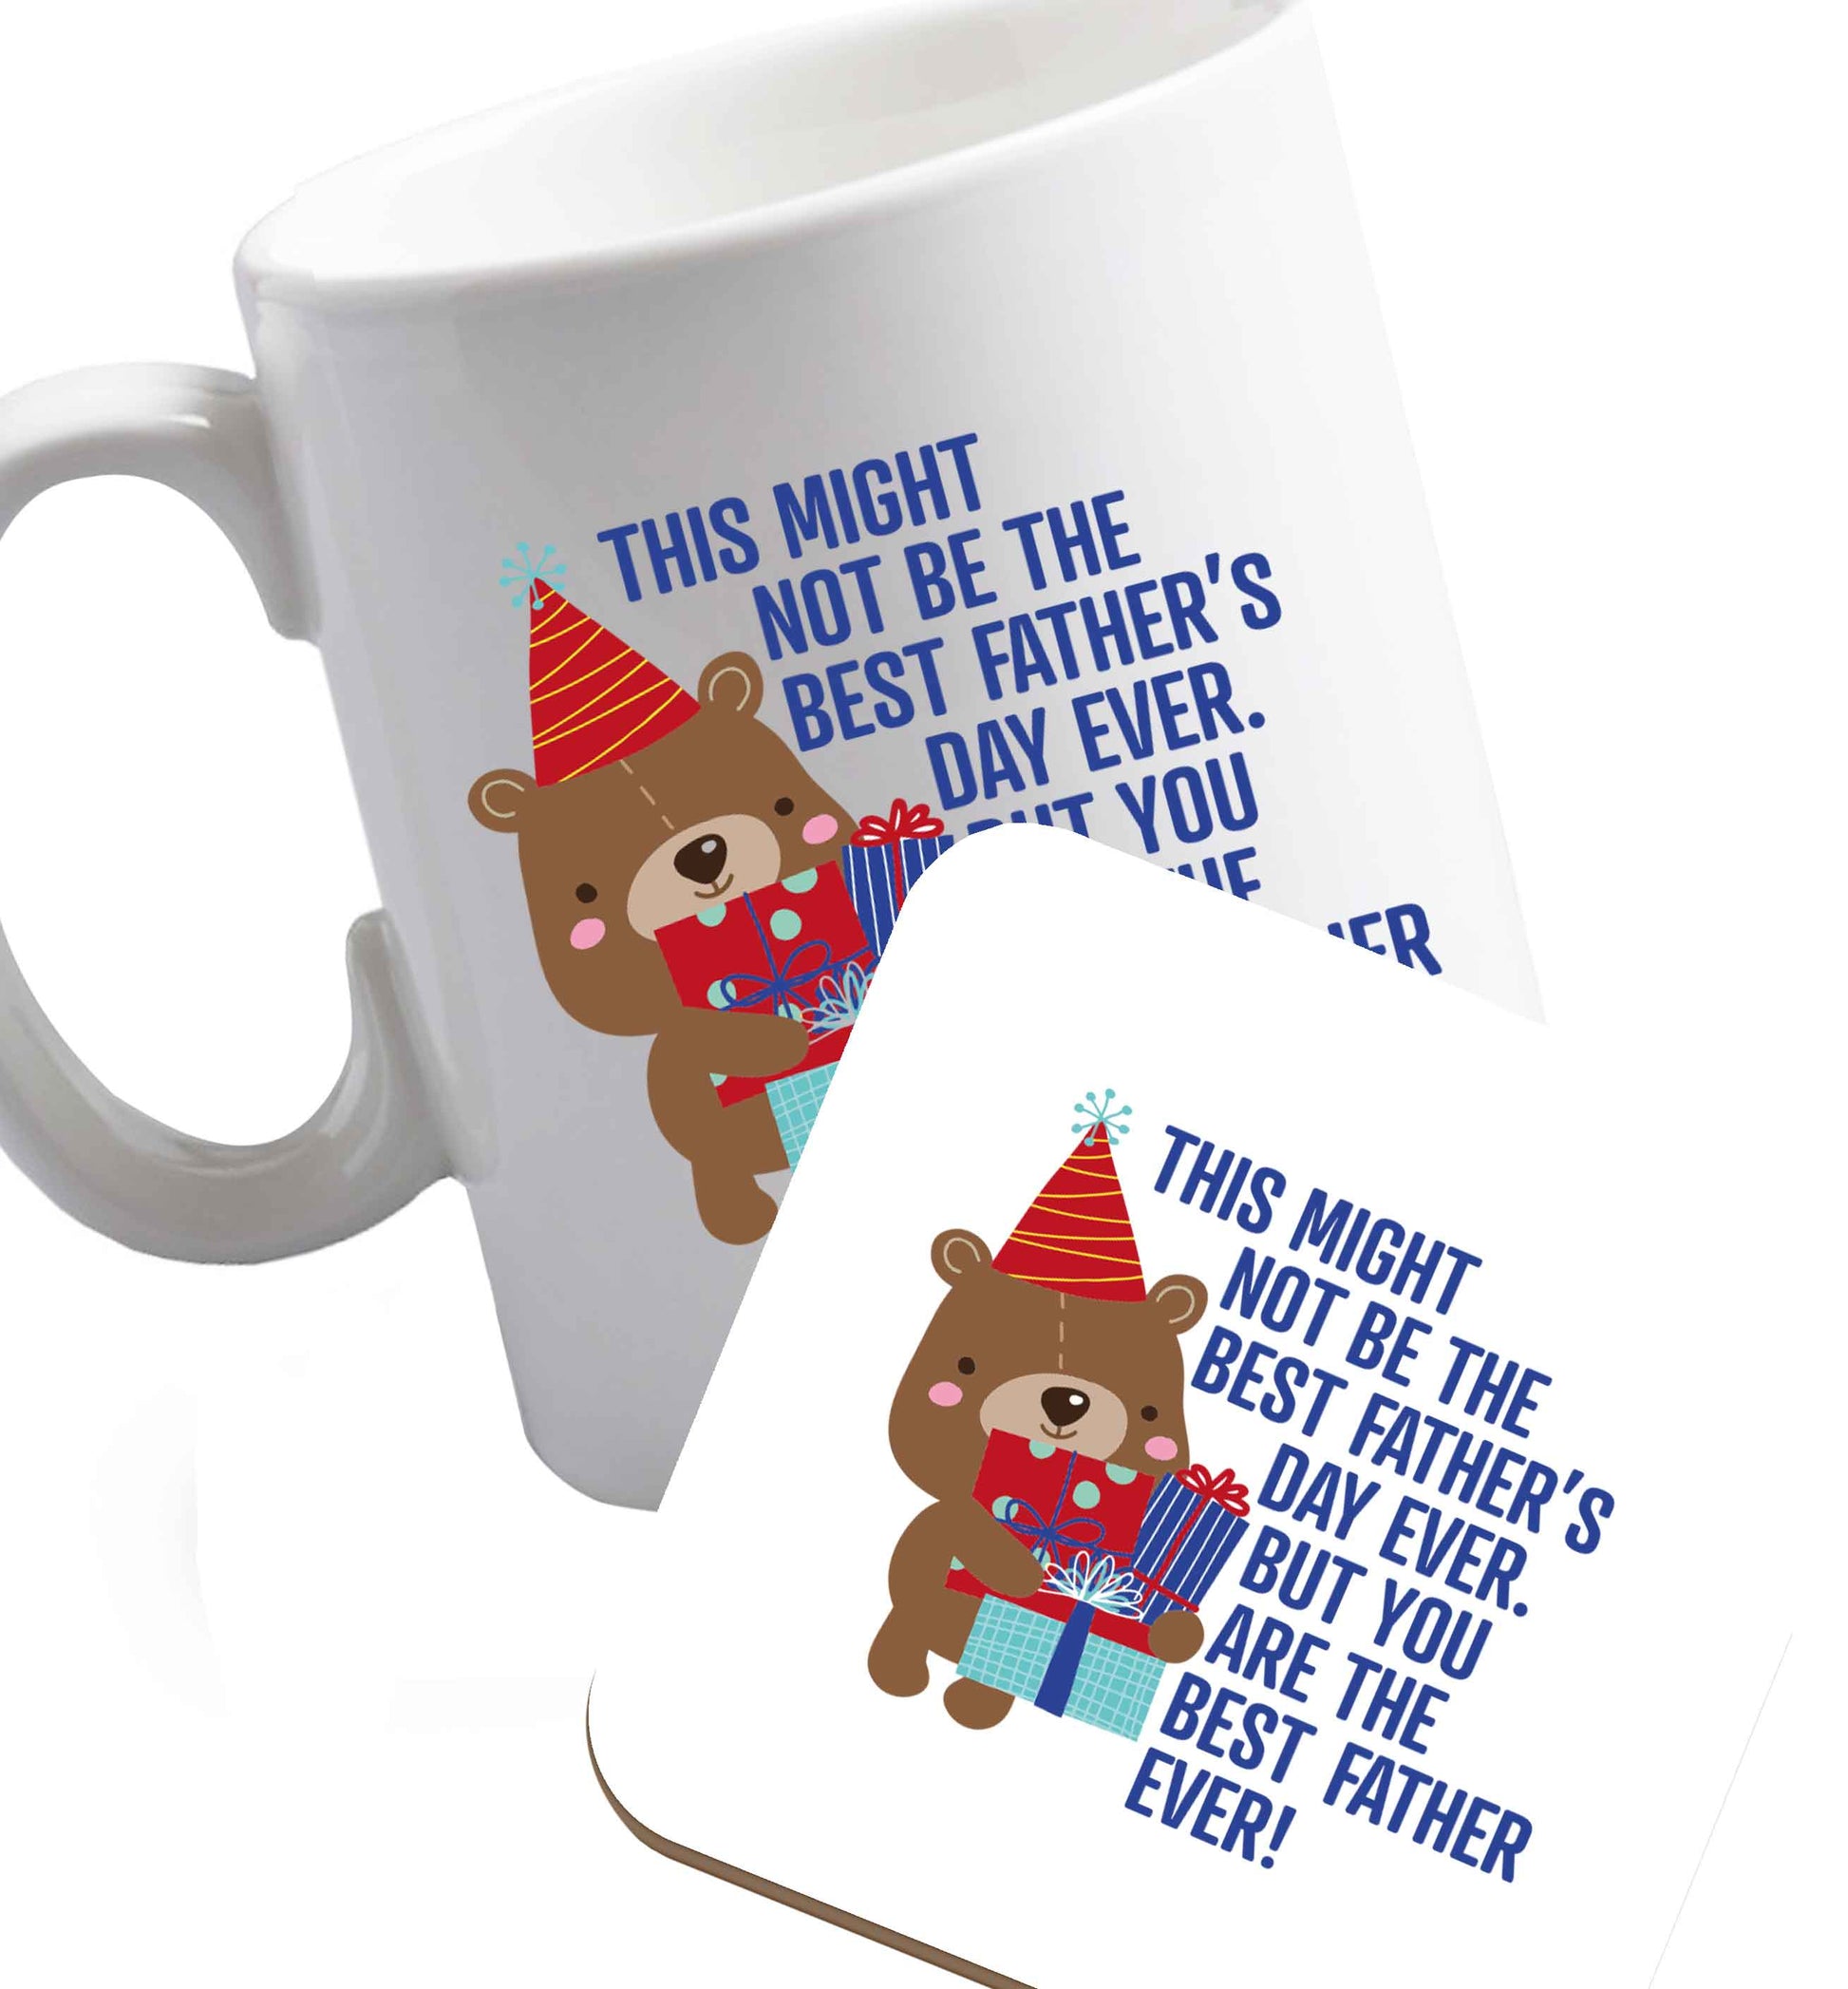 10 oz It might not be the best Father's Day ever but you are the best father ever! ceramic mug and coaster set right handed